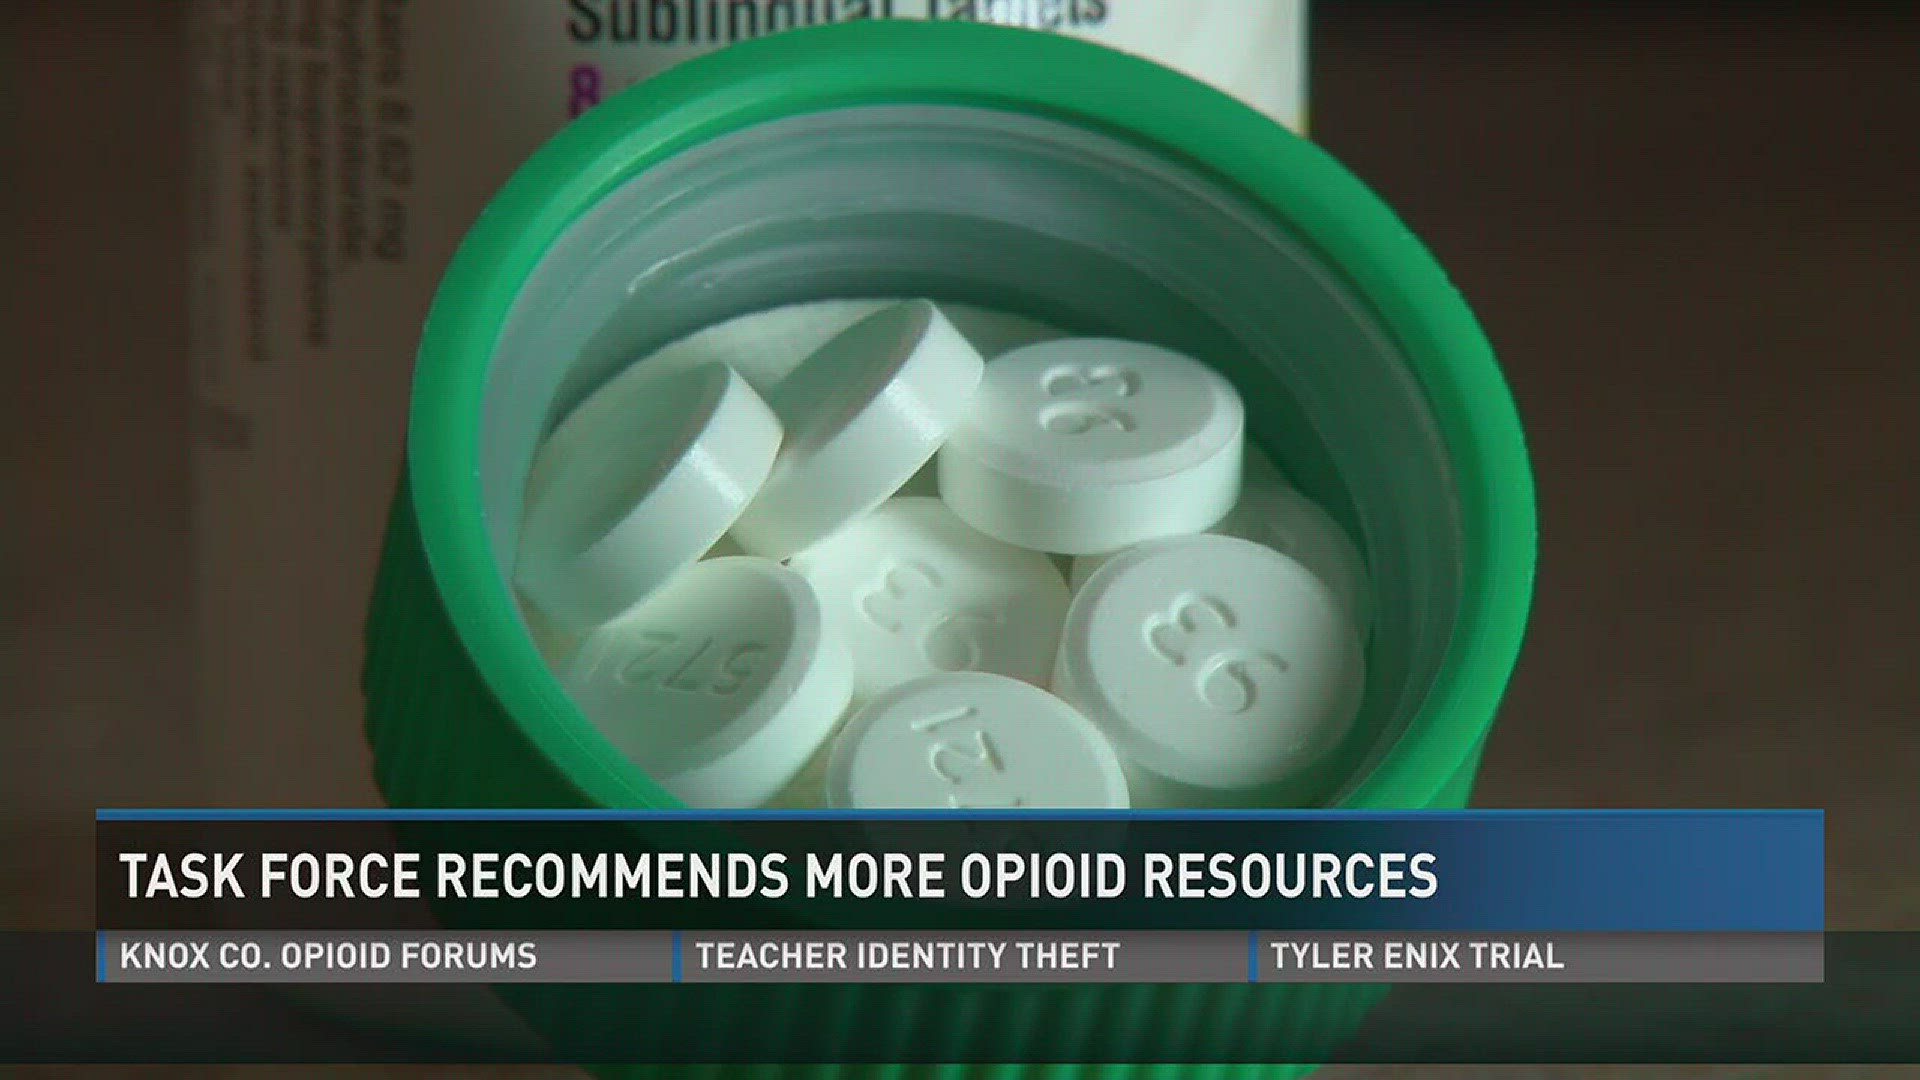 Sept. 27, 2017: From limiting dosages for prescription drugs to adding lesson plans about drugs in schools, a state task force has released new recommendations to help fight the opioid epidemic.